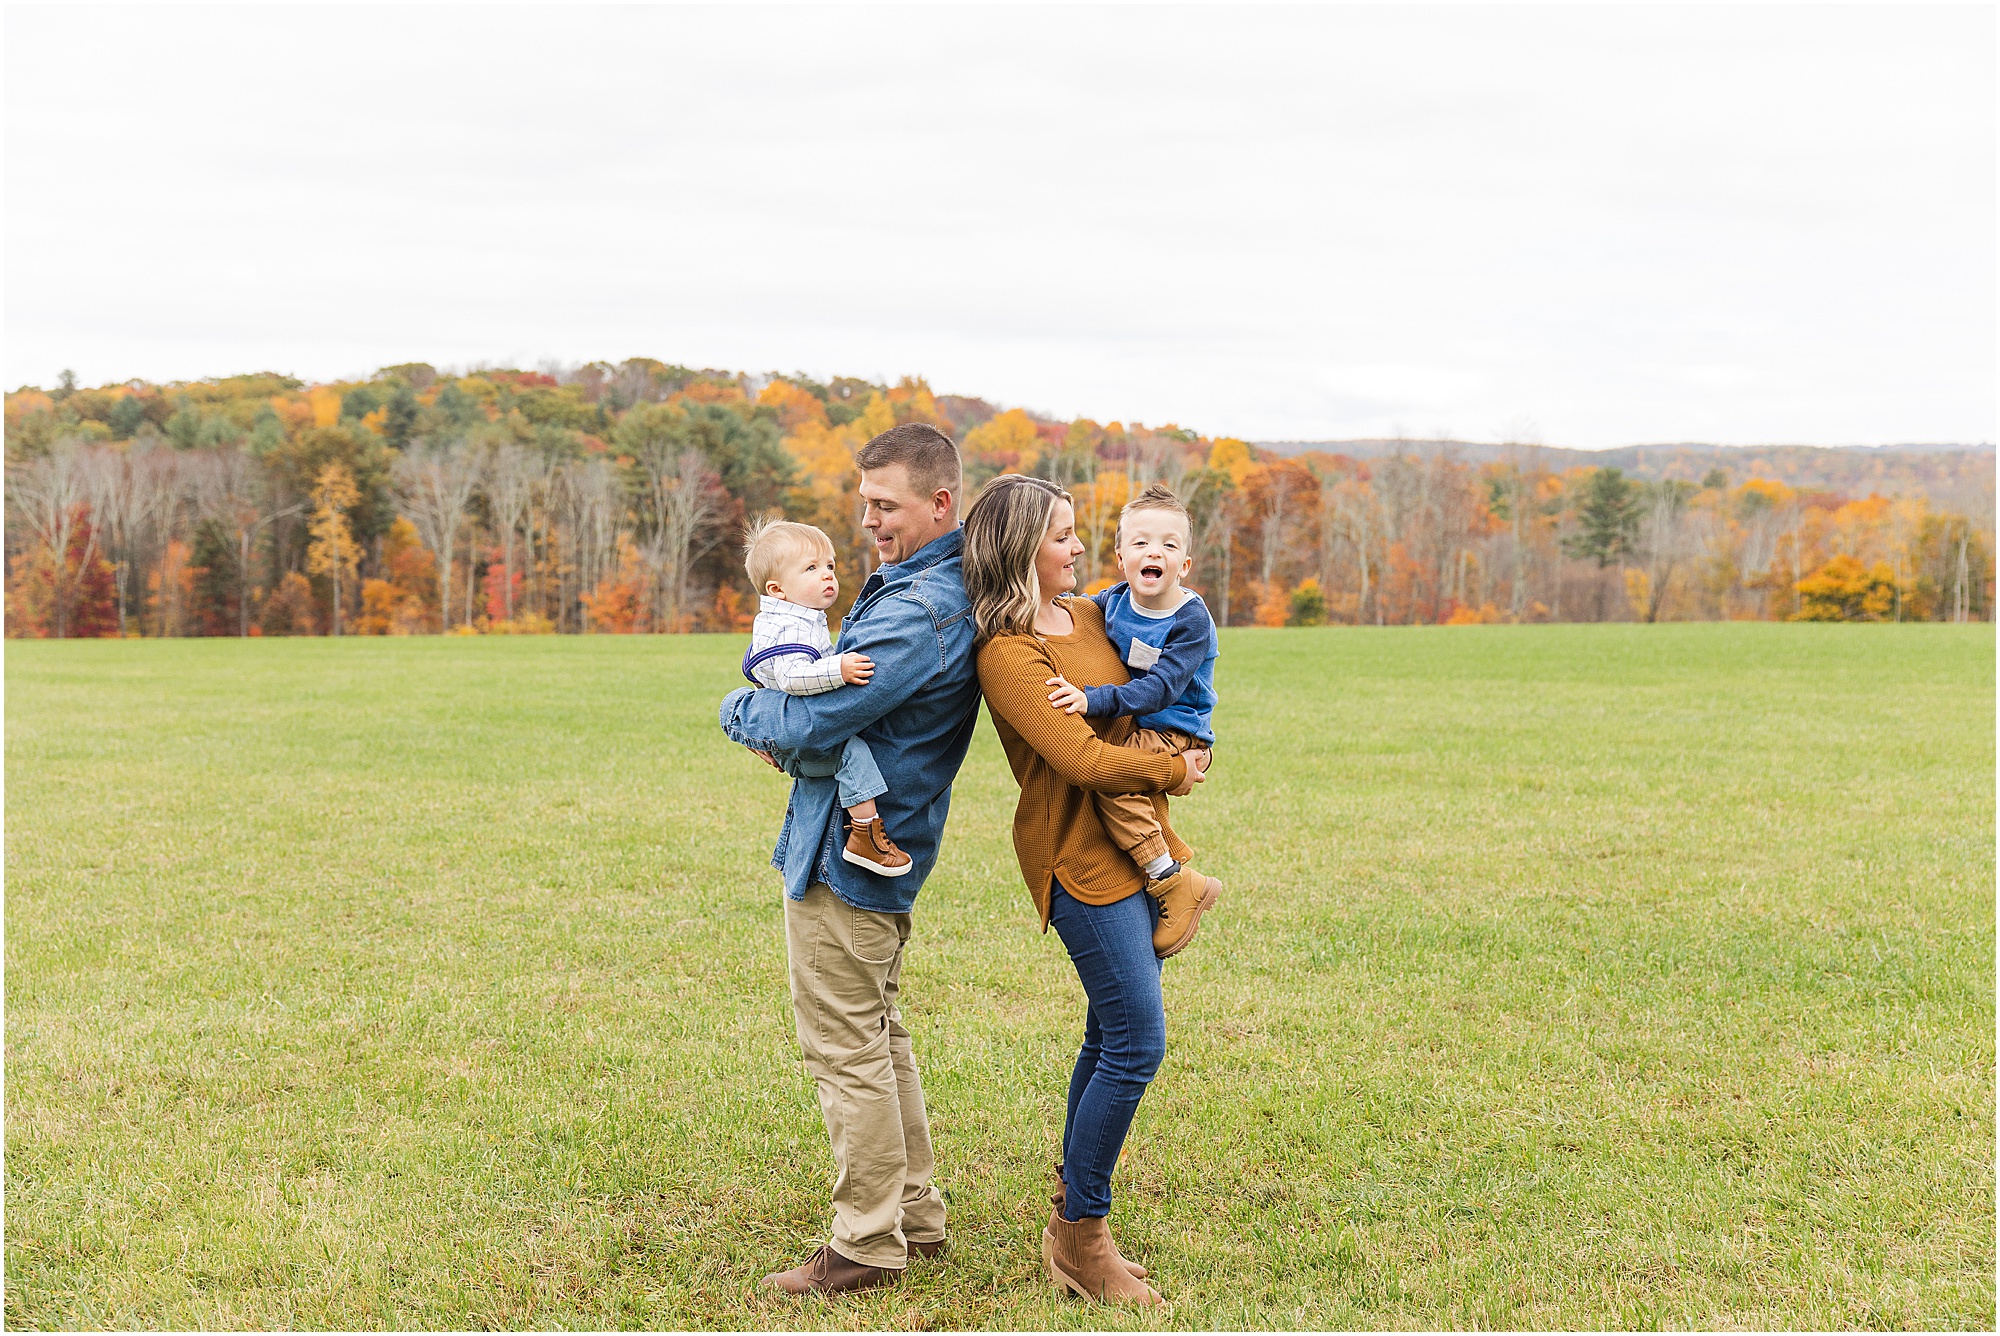 outdoor family portrait session in central massachusetts with foliage and classic new england views - spencer massachusetts